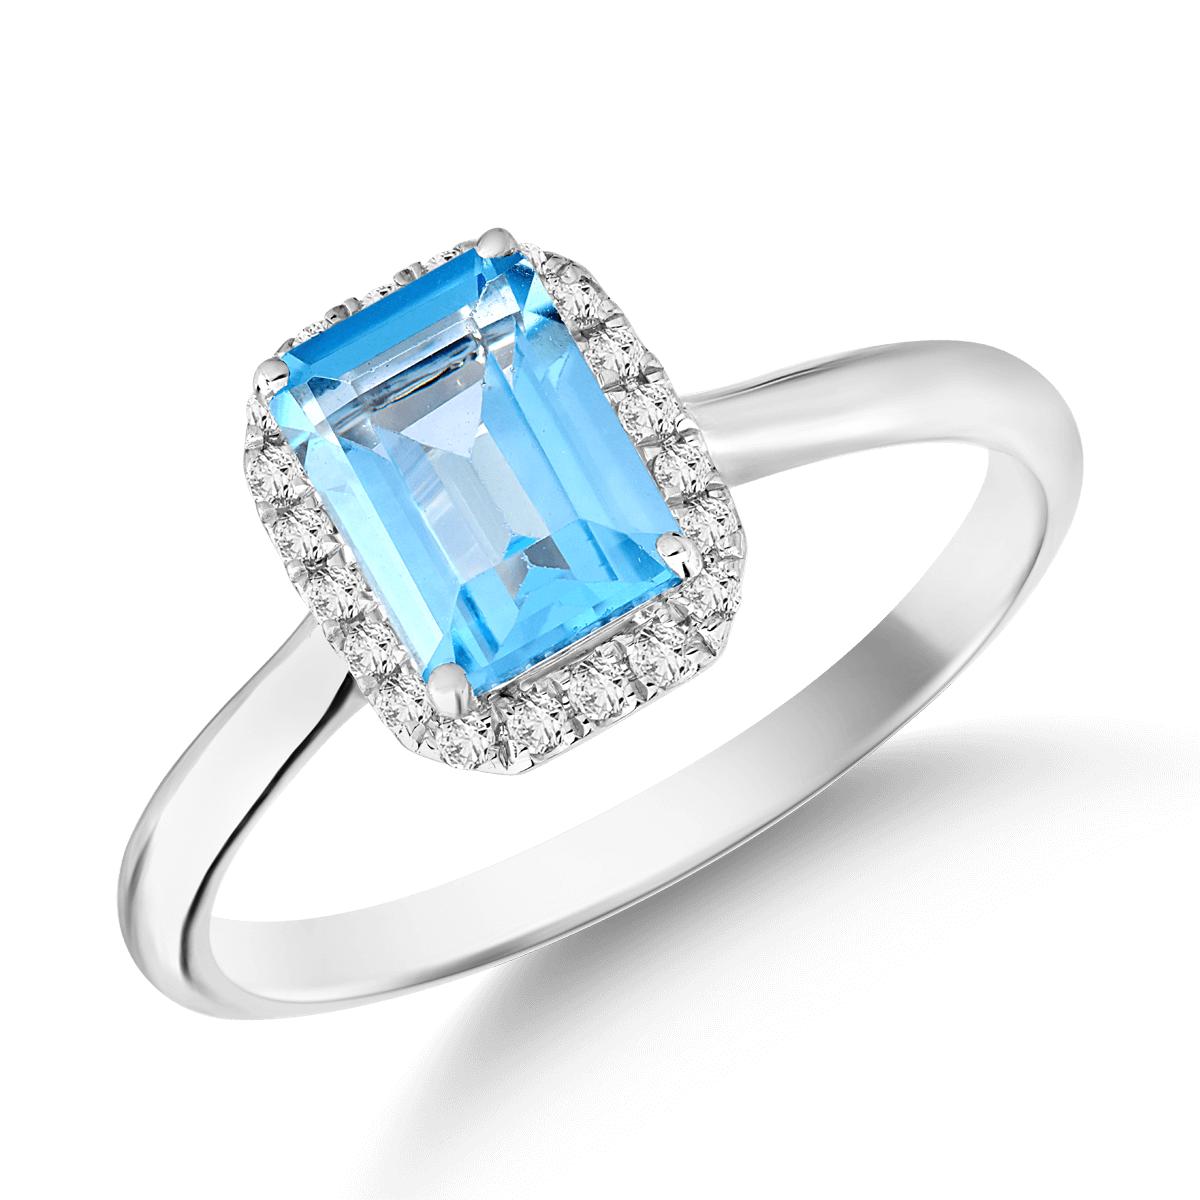 18K white gold ring with 1.23ct blue topaz and 0.1ct diamonds